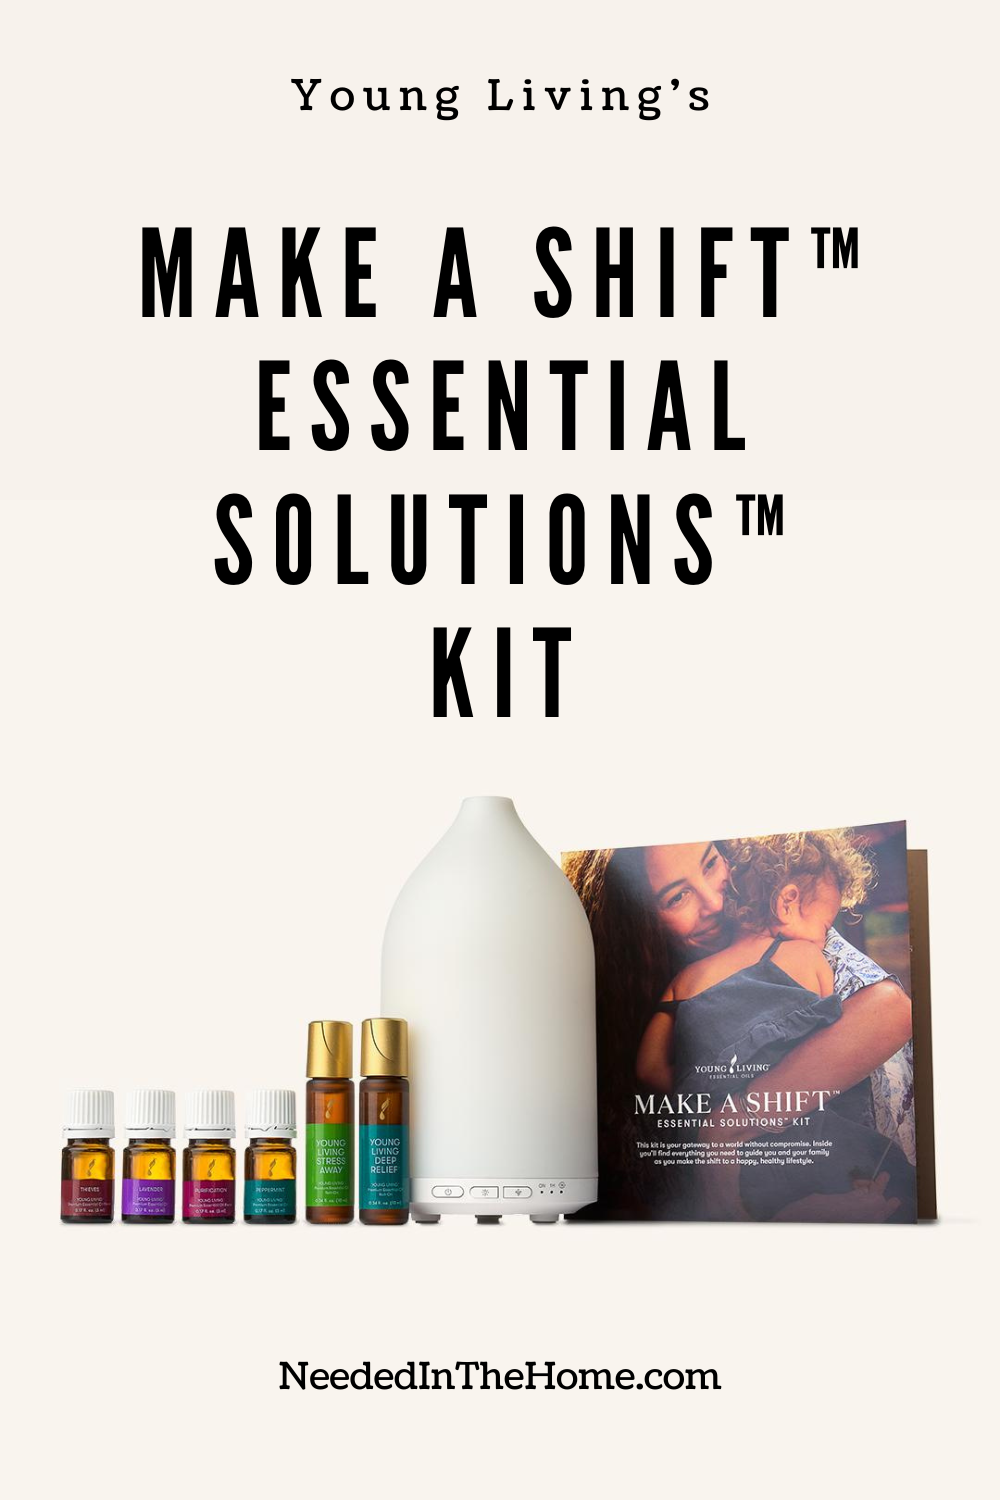 pinterest-pin-description young living's make a shift essential solutions kit diffuser booklet essential oils bottles roll ons neededinthehome